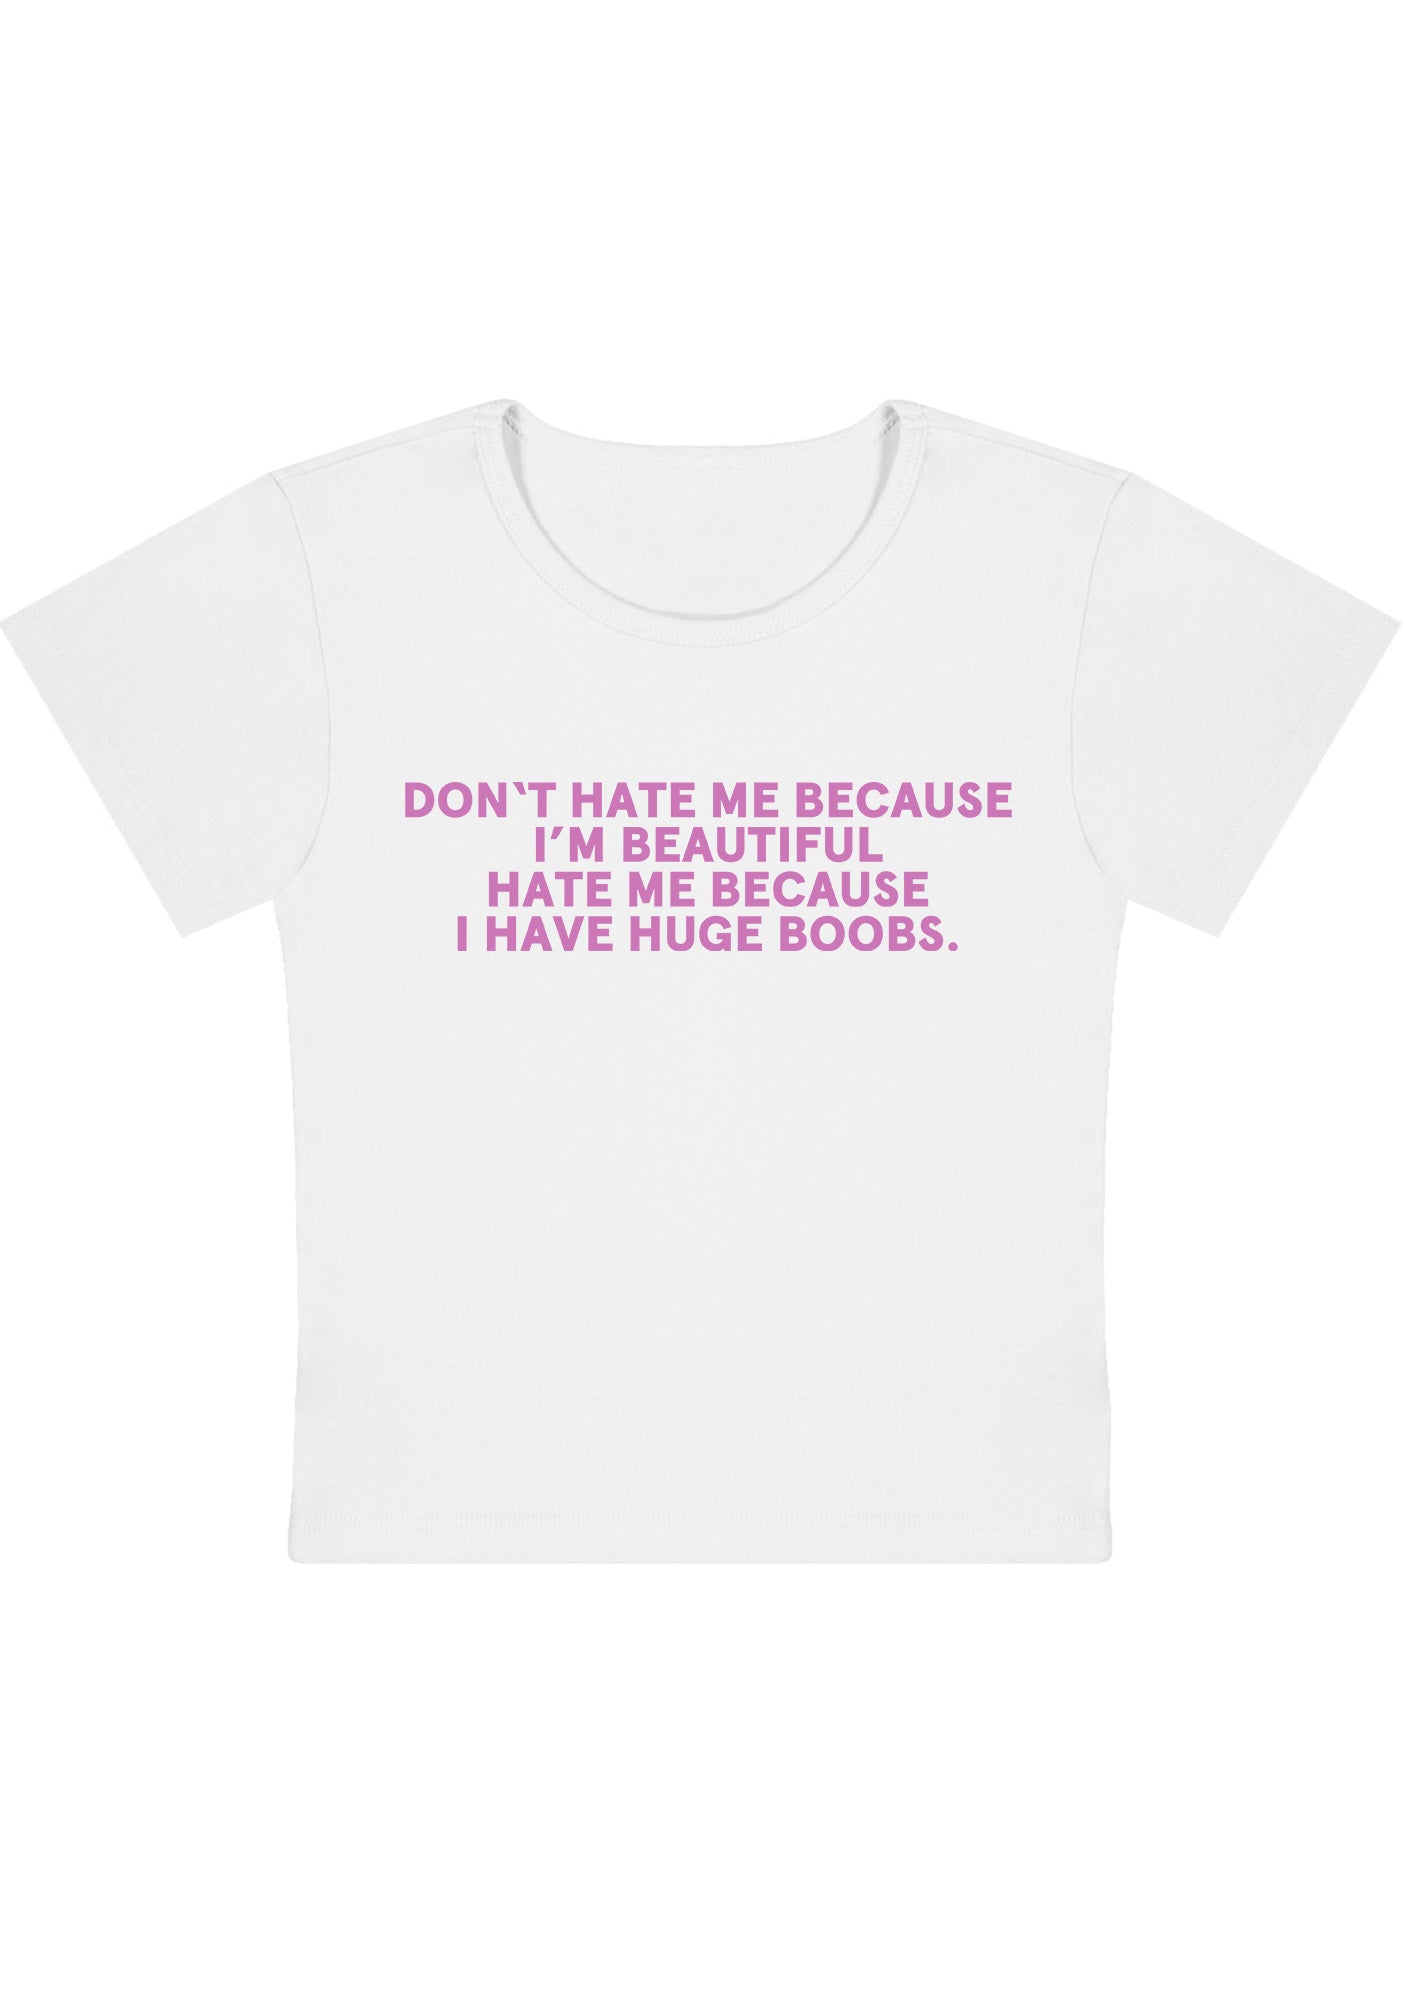 Curvy Hate Me Because I Have Huge Bxxbs Baby Tee